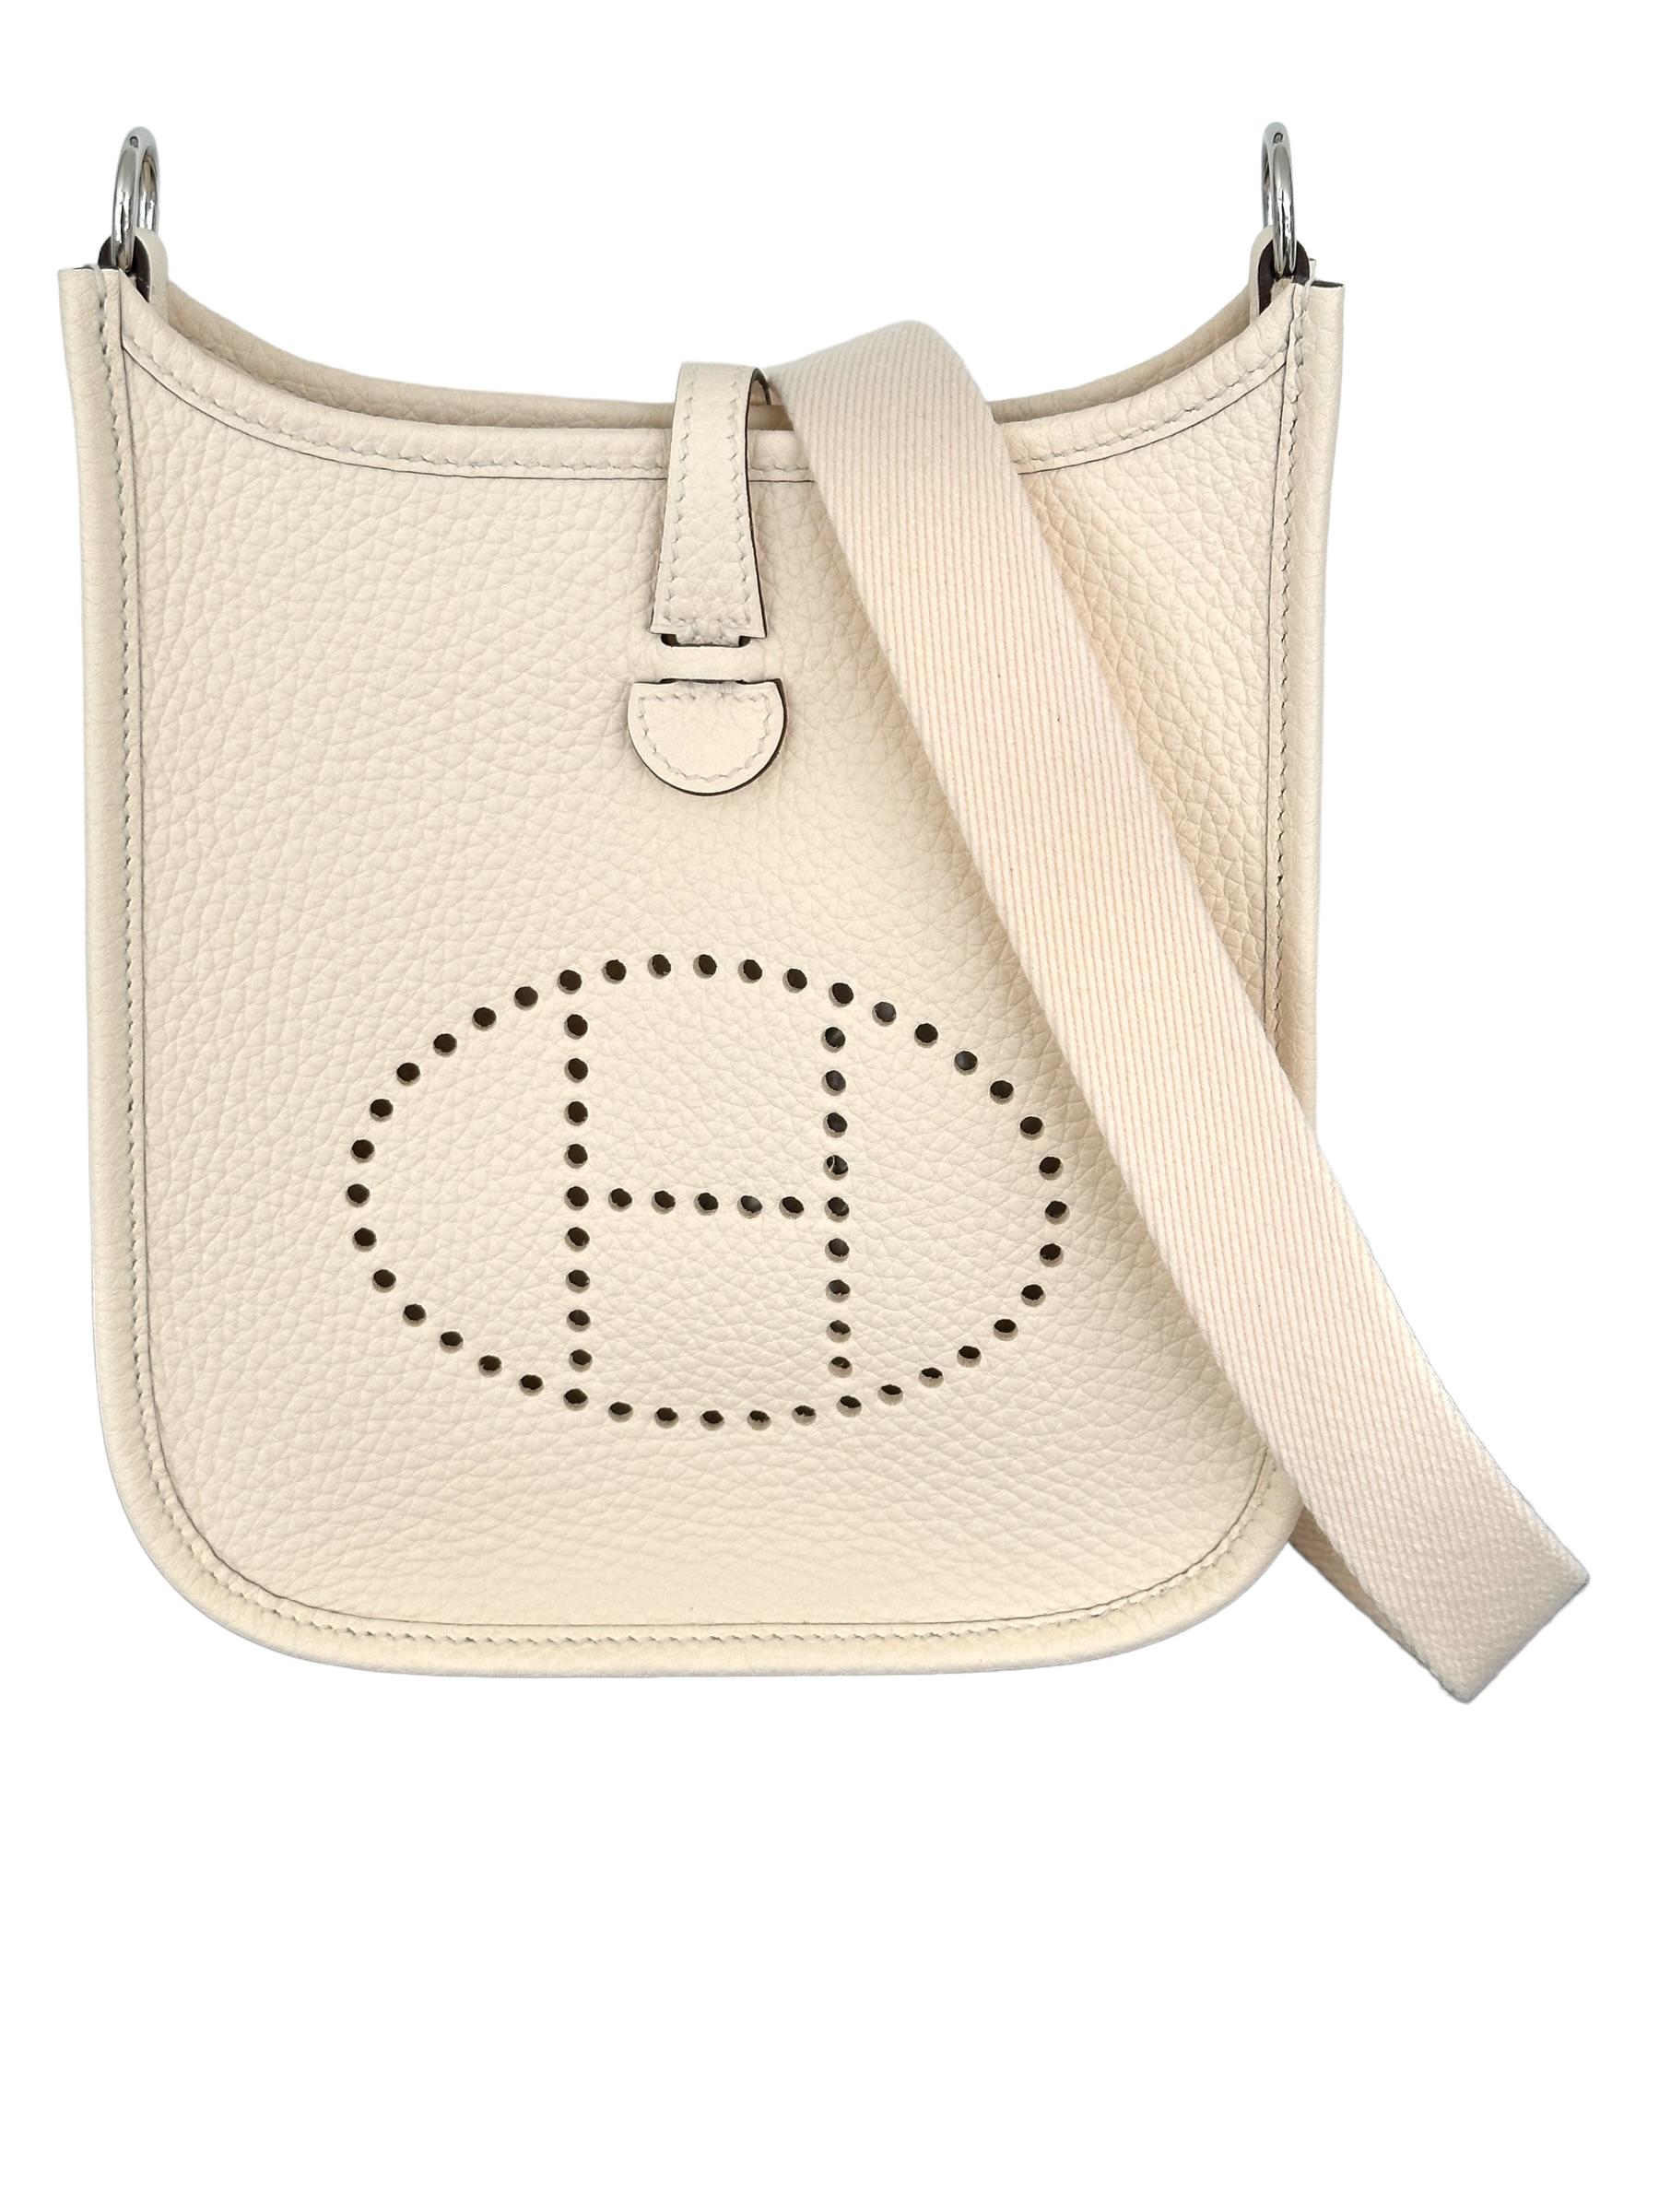 Hermes Evelyne Tpm 16
We have it in stock, ready, store fresh

This is the mini, the smallest size they make
The perfect neutral! Think spring summer

Color is Nata
Comes with matching strap 

Collection U
Natural  interior
Palladium plated